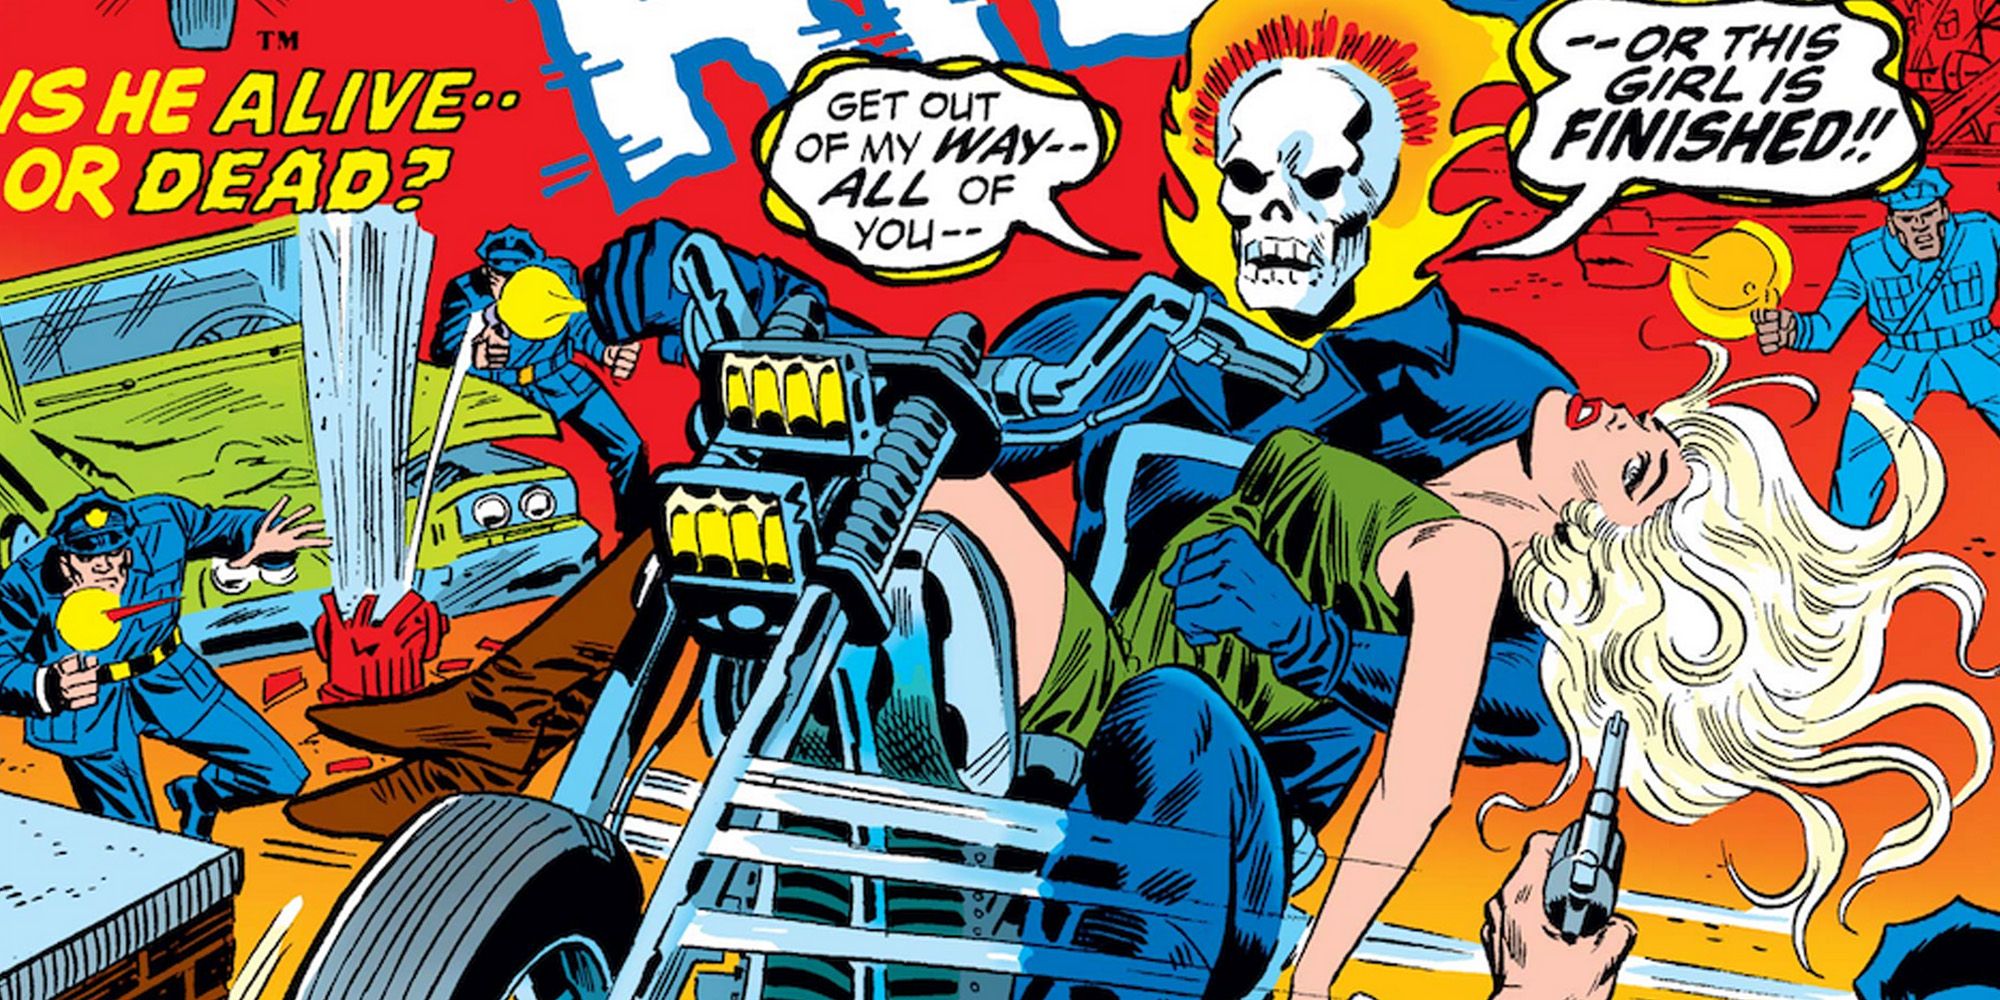 An image of Ghost Rider riding his motorbike in the Marvel Comics